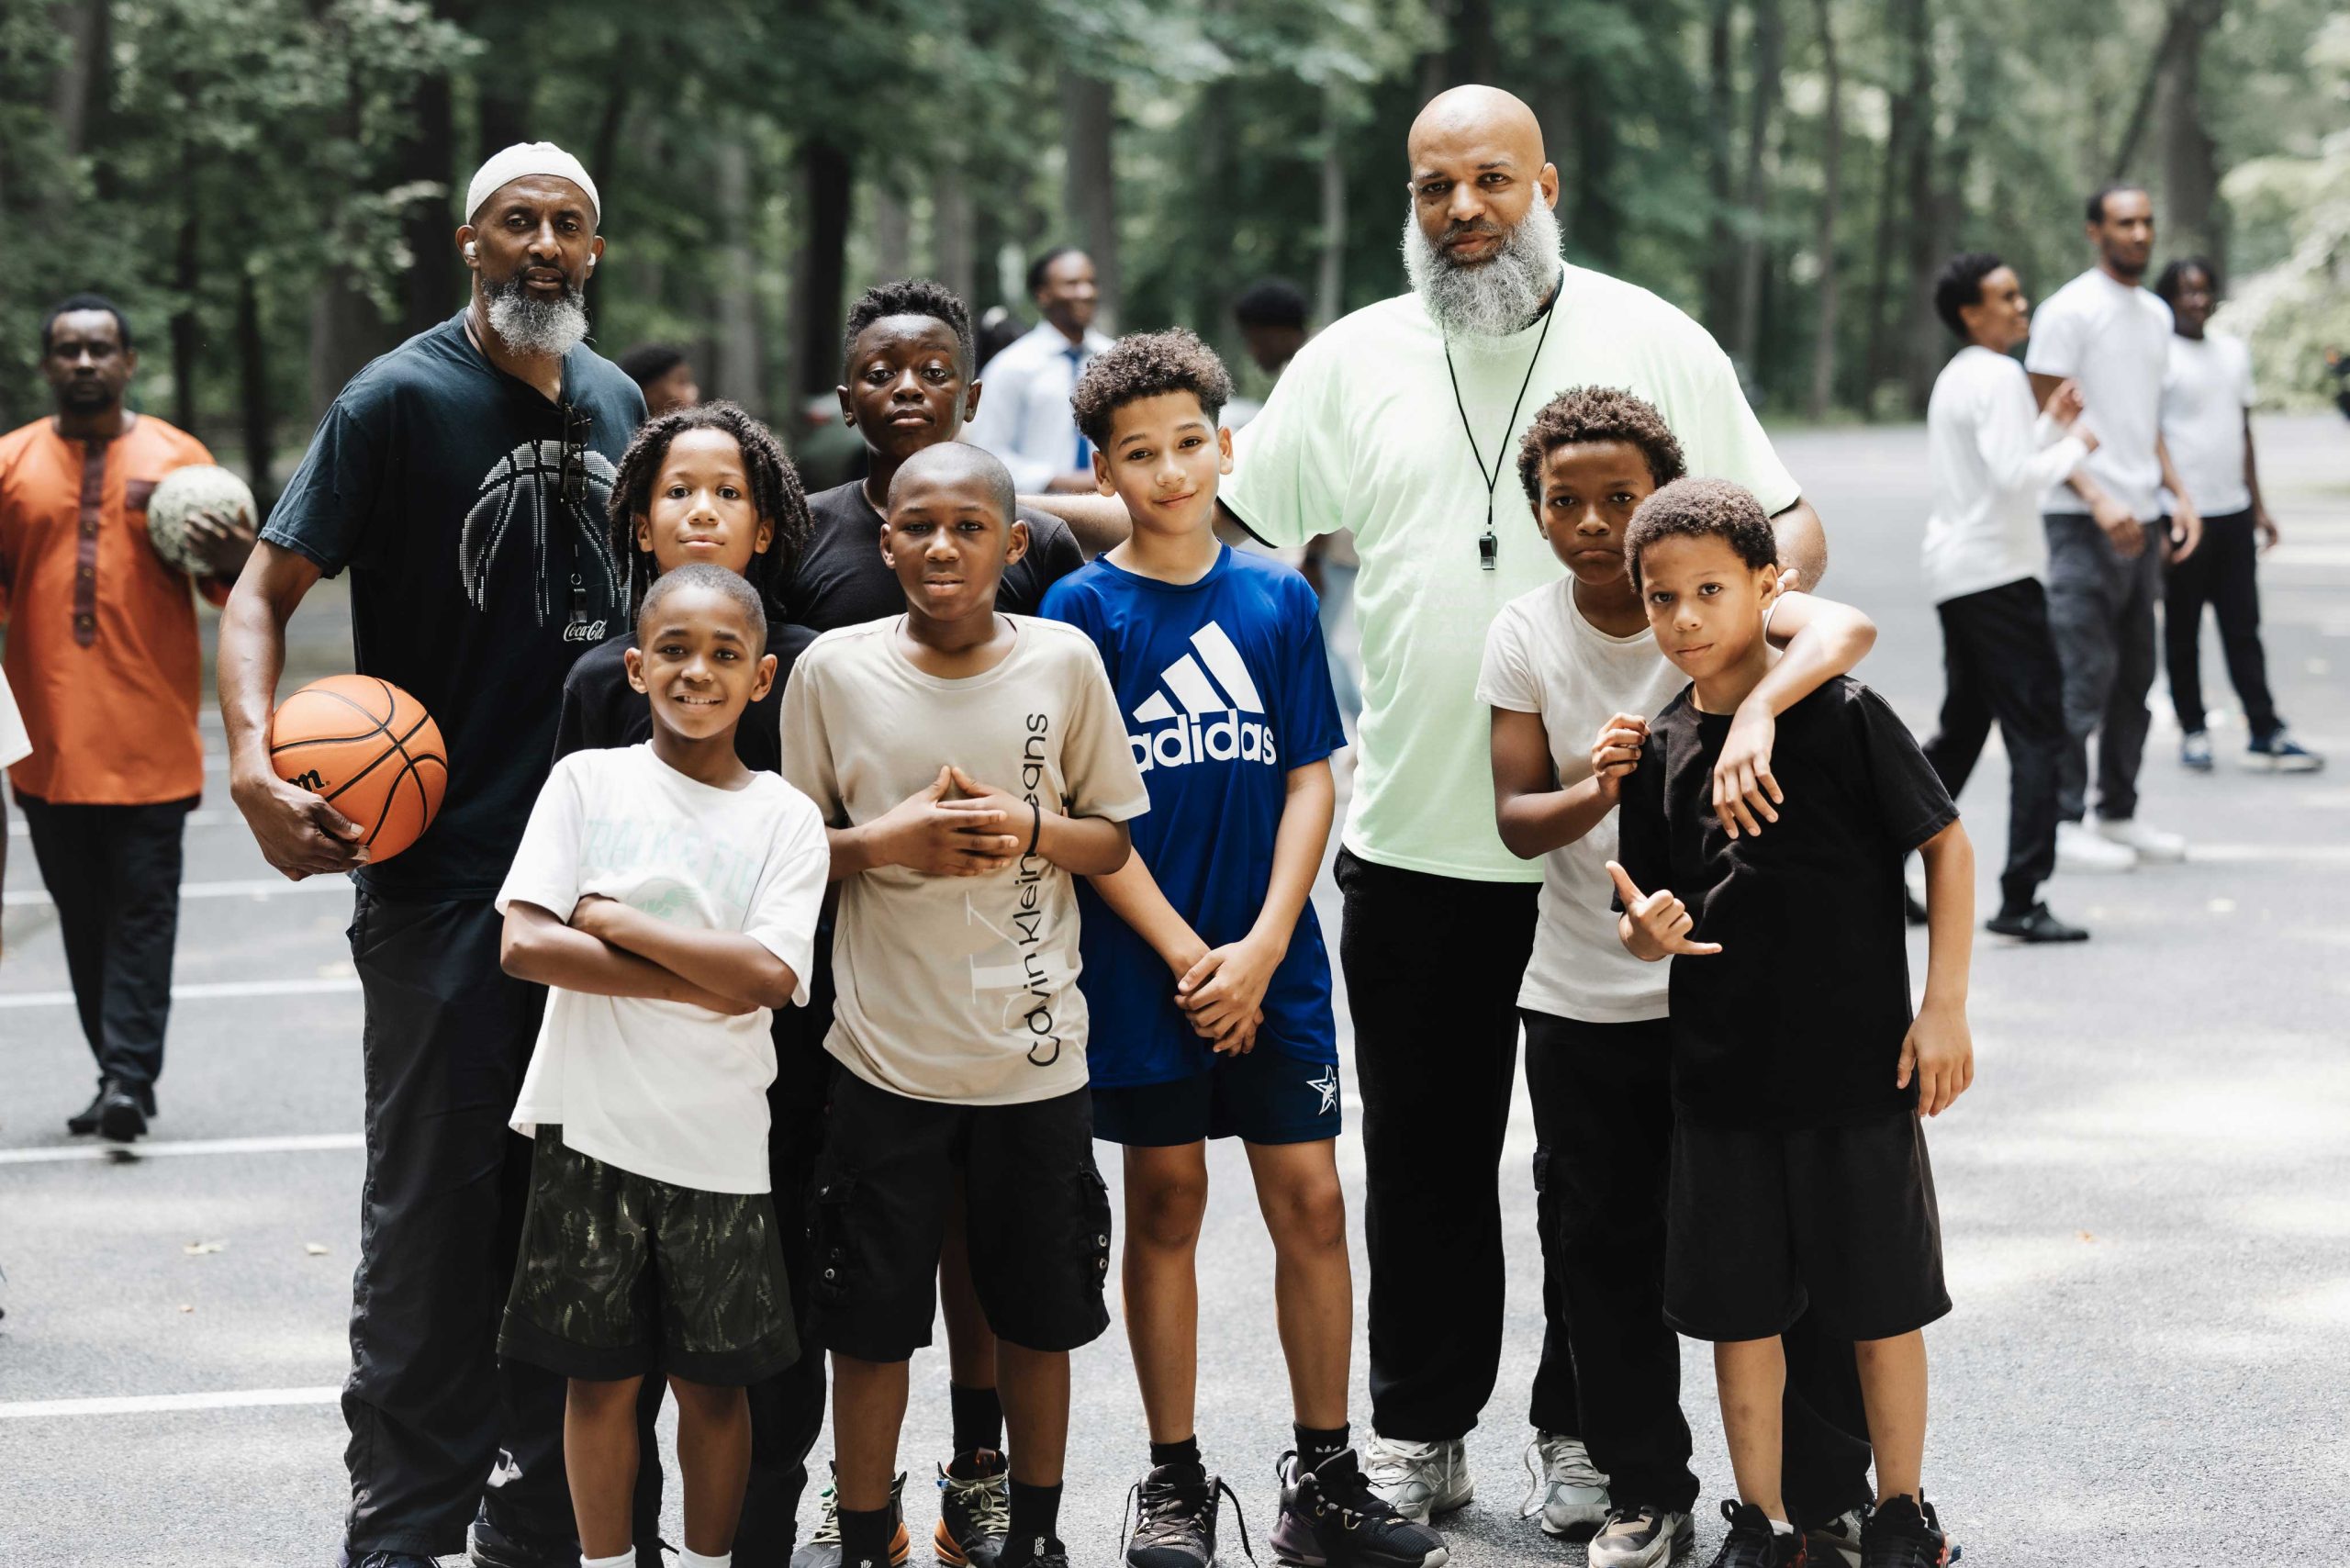 Two coaches posing with a group of young boys after a basketball game